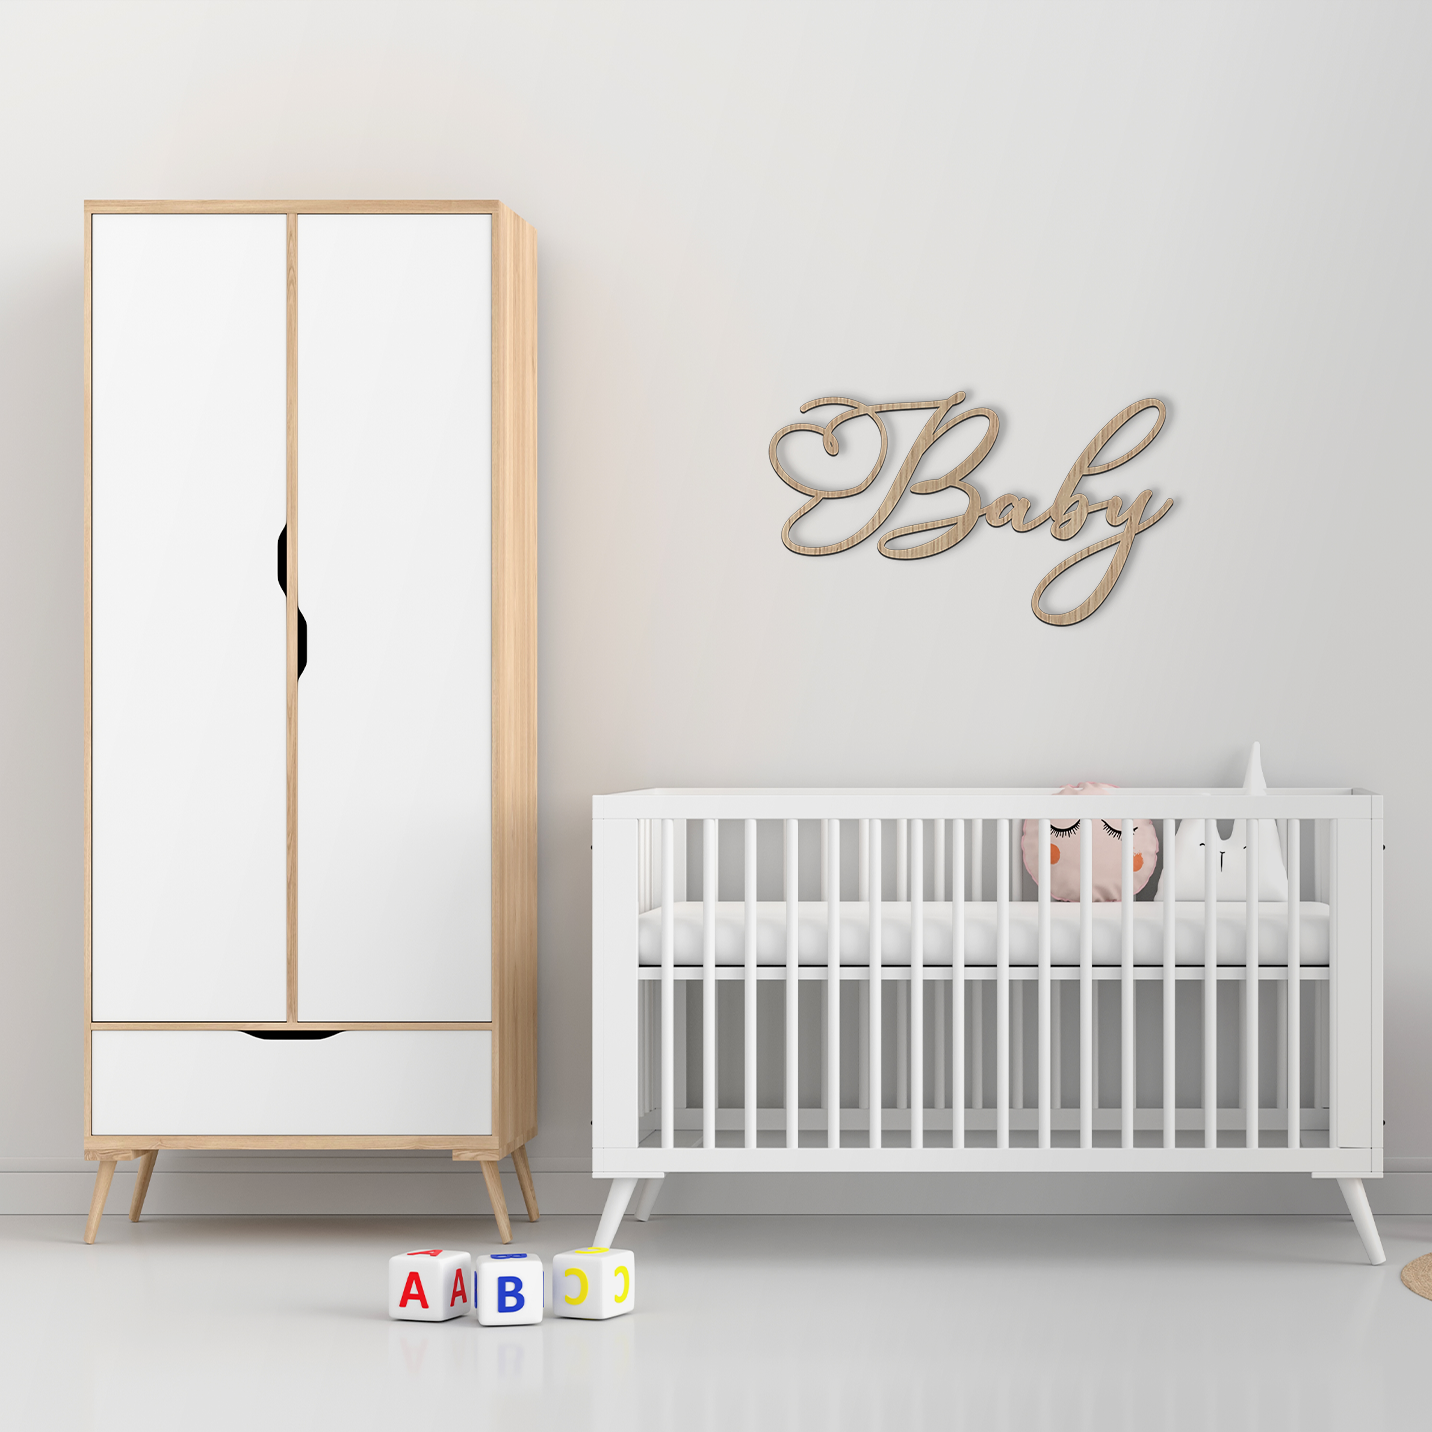 Wooden Baby & Nursery Wall Décor: How It Can Bring the Whole Room Together